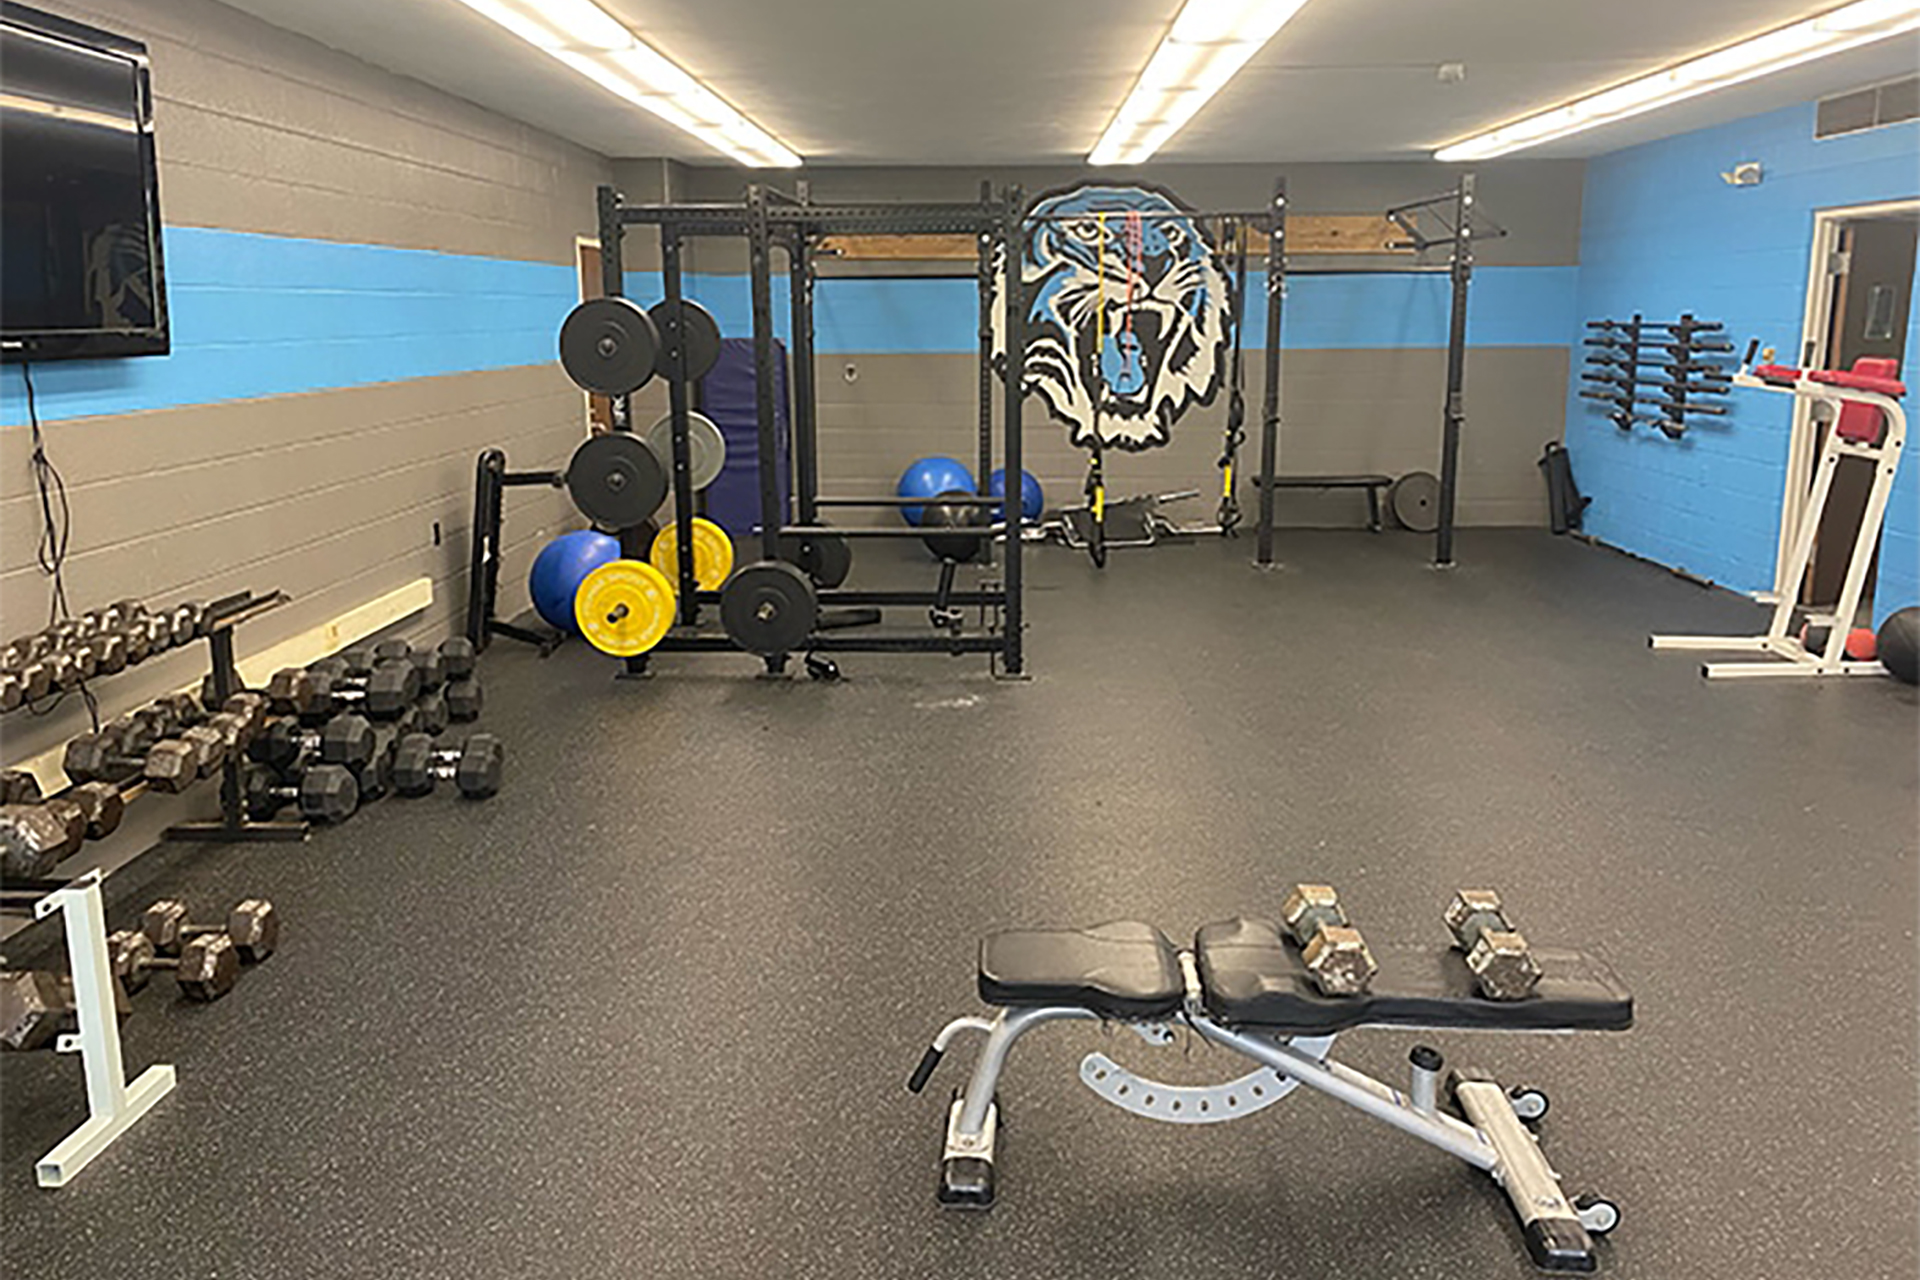 Interior View of the Fitness Center / Weight Room.